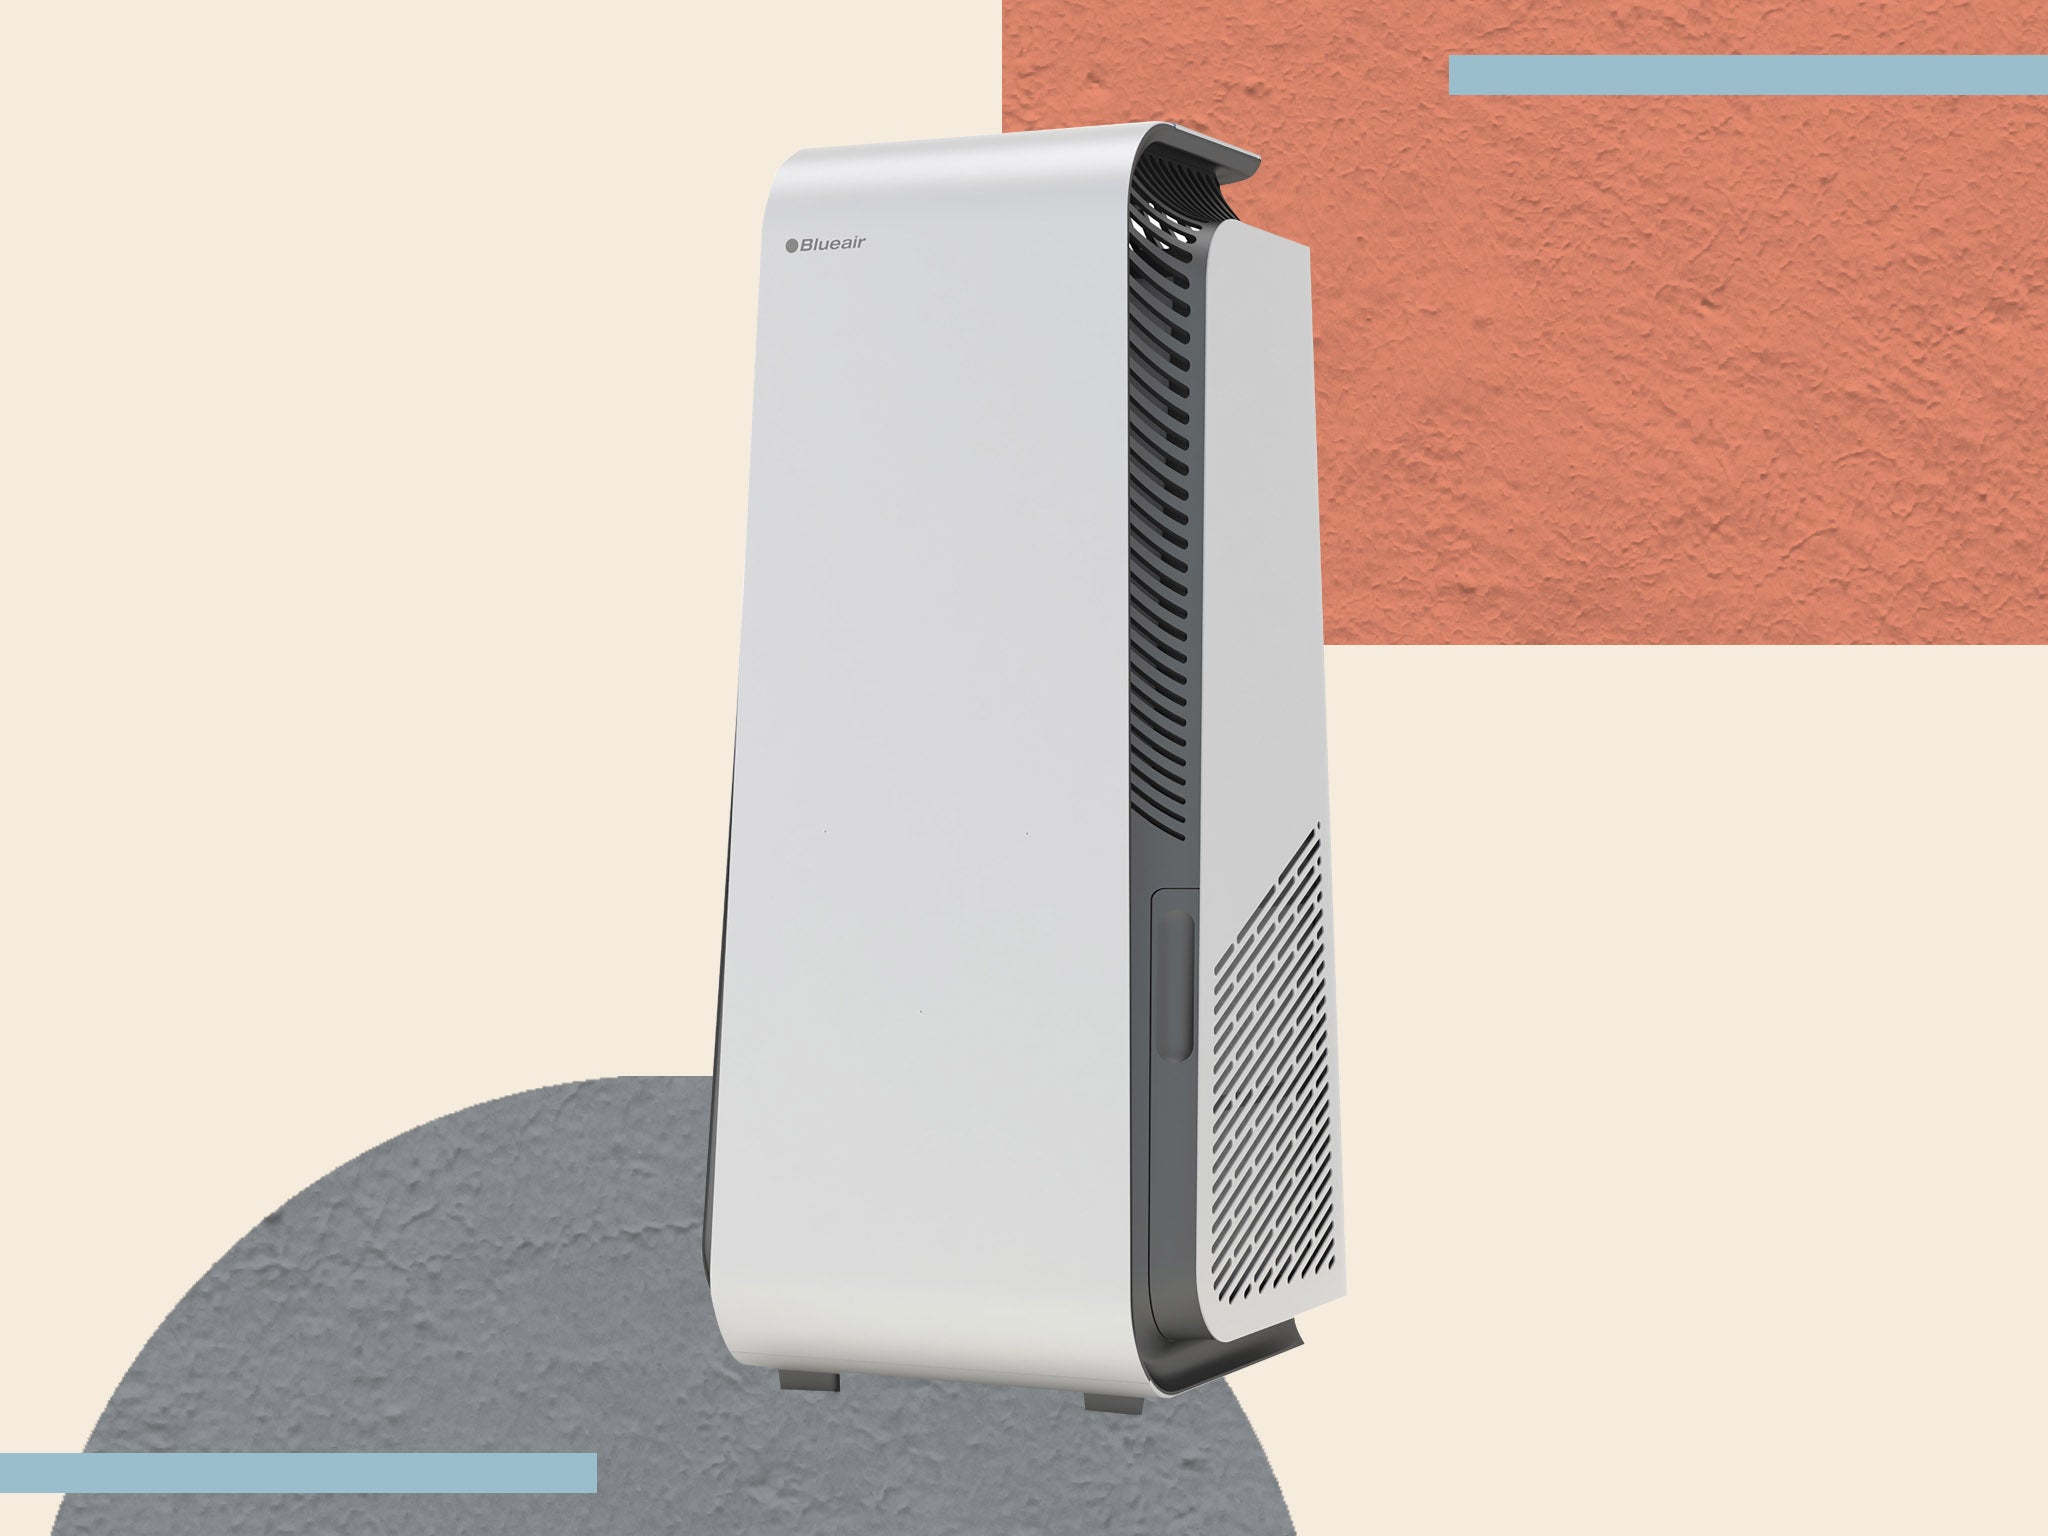 Designed to be on 24/7, this device will filter out any pollutants in the air, including viruses